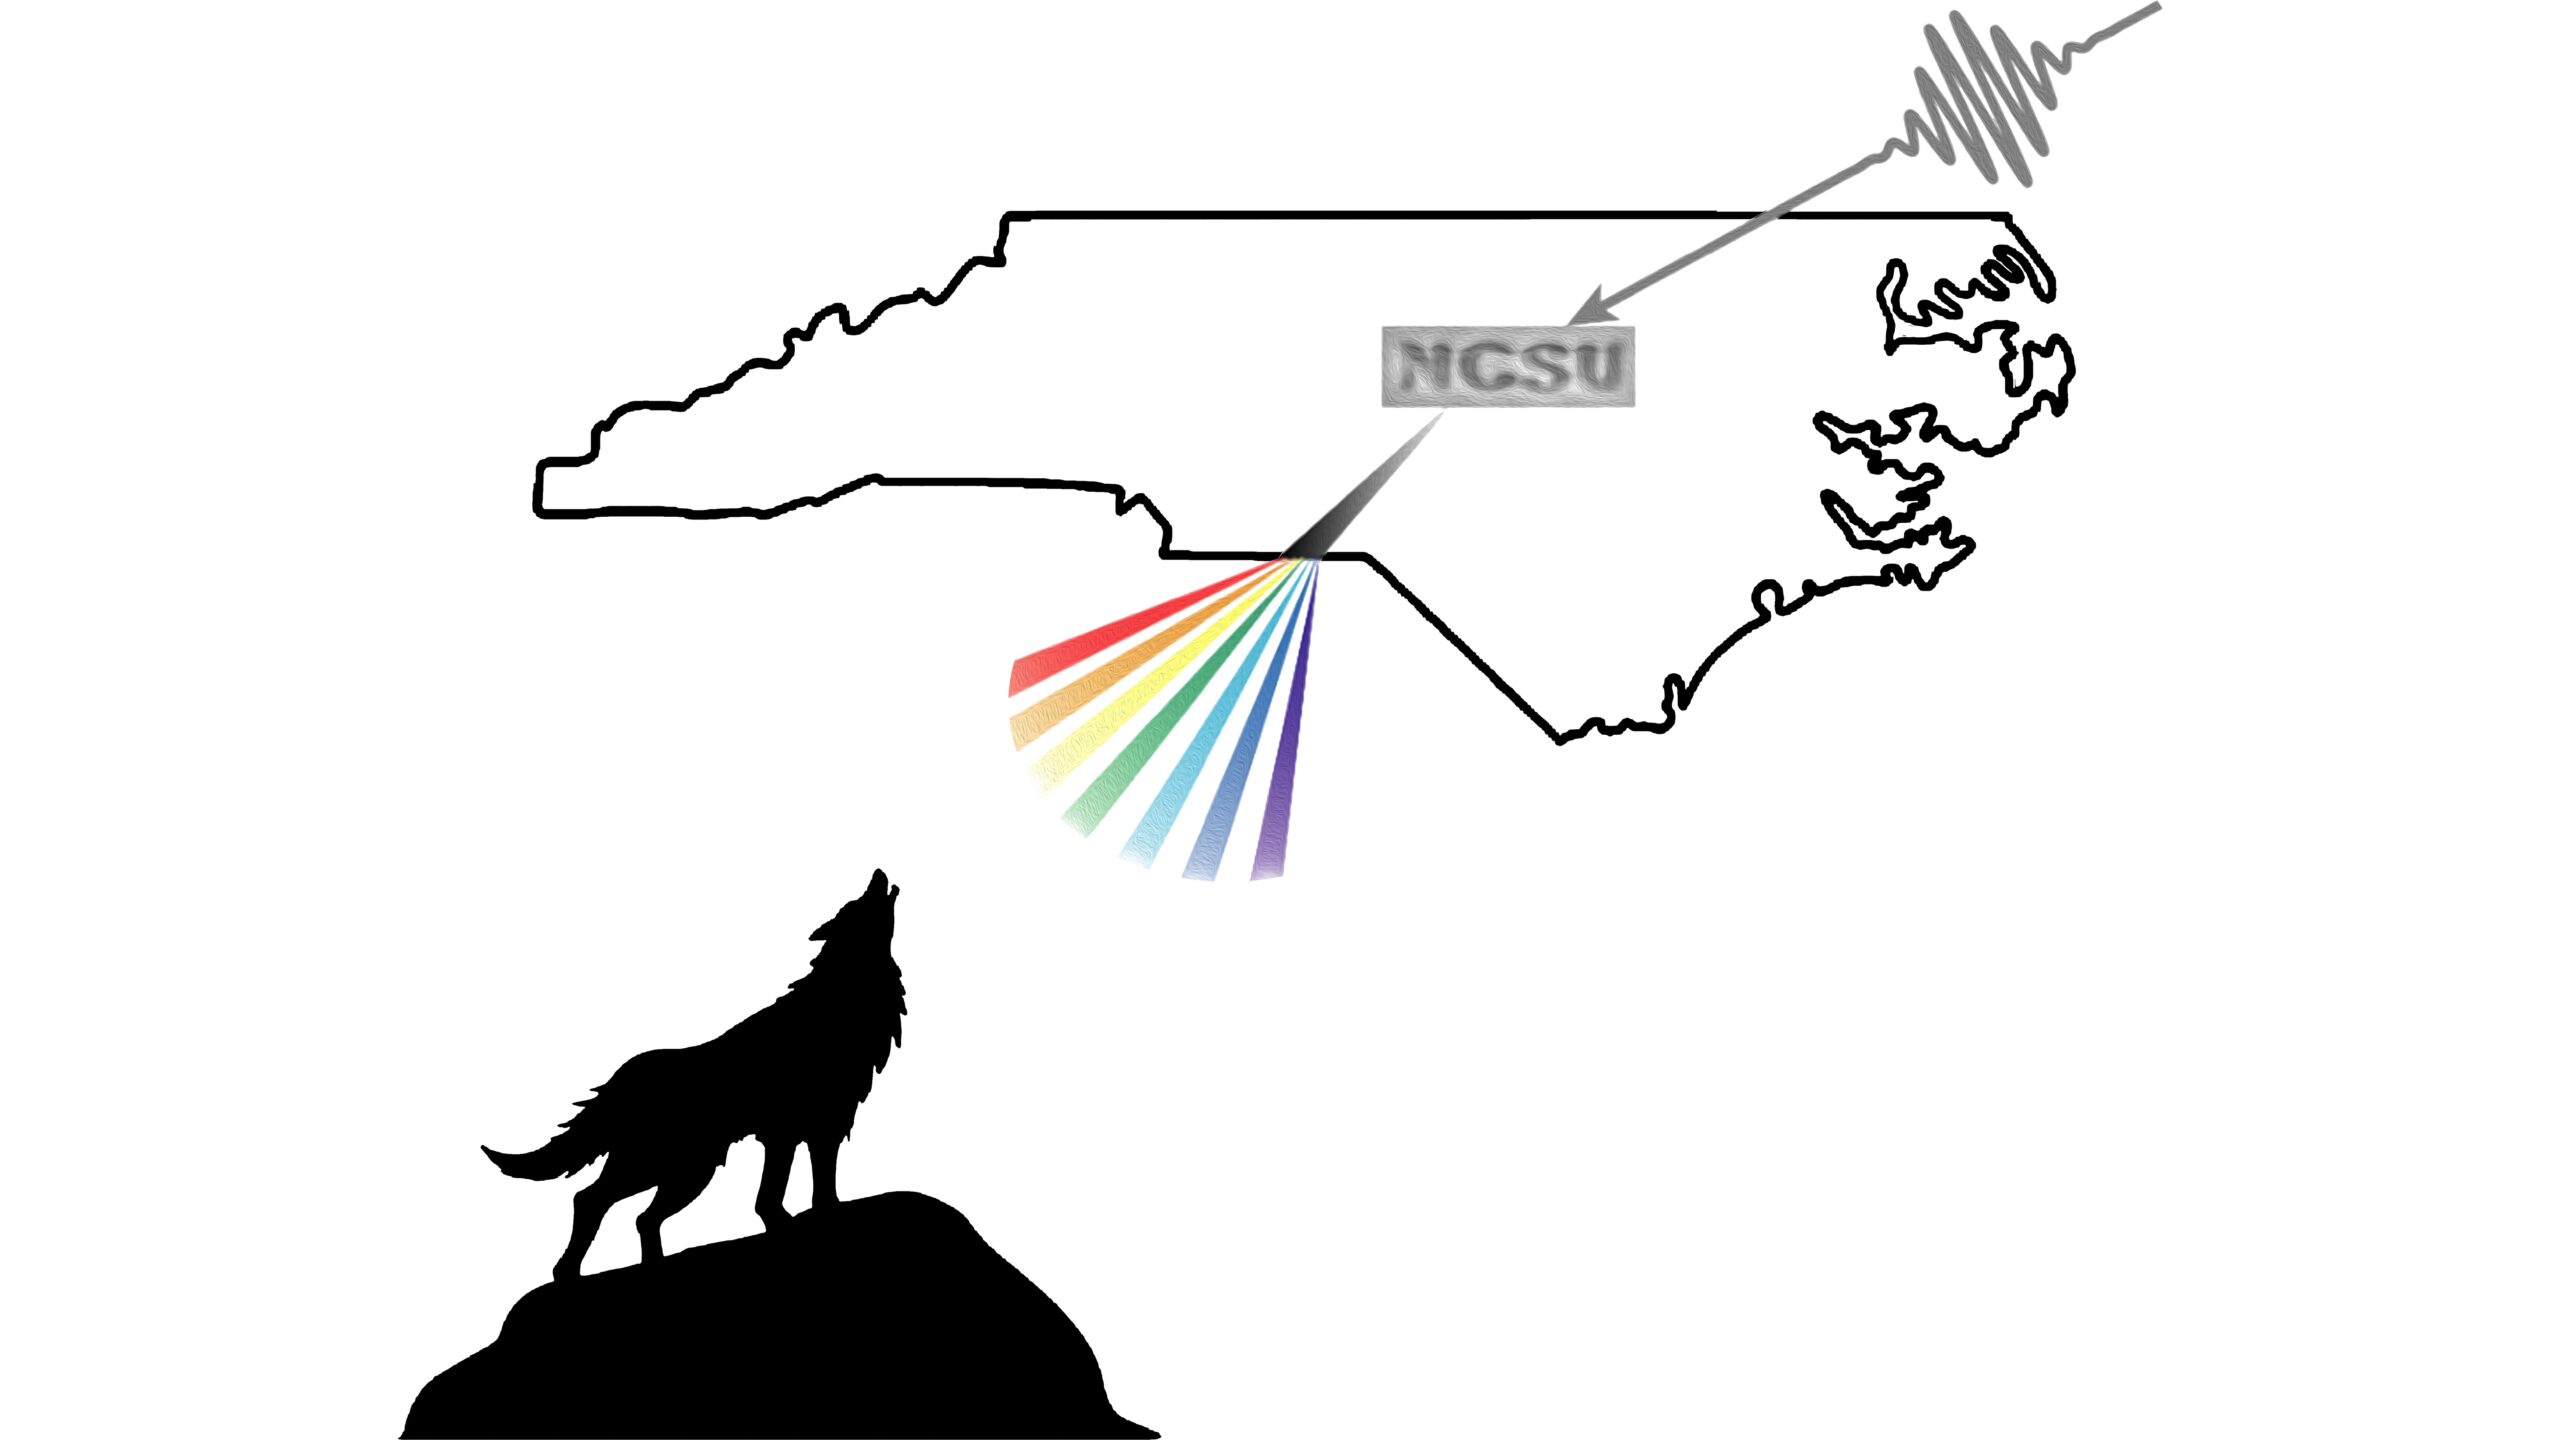 North Carolina with light passing through Raleigh and a howling wolf